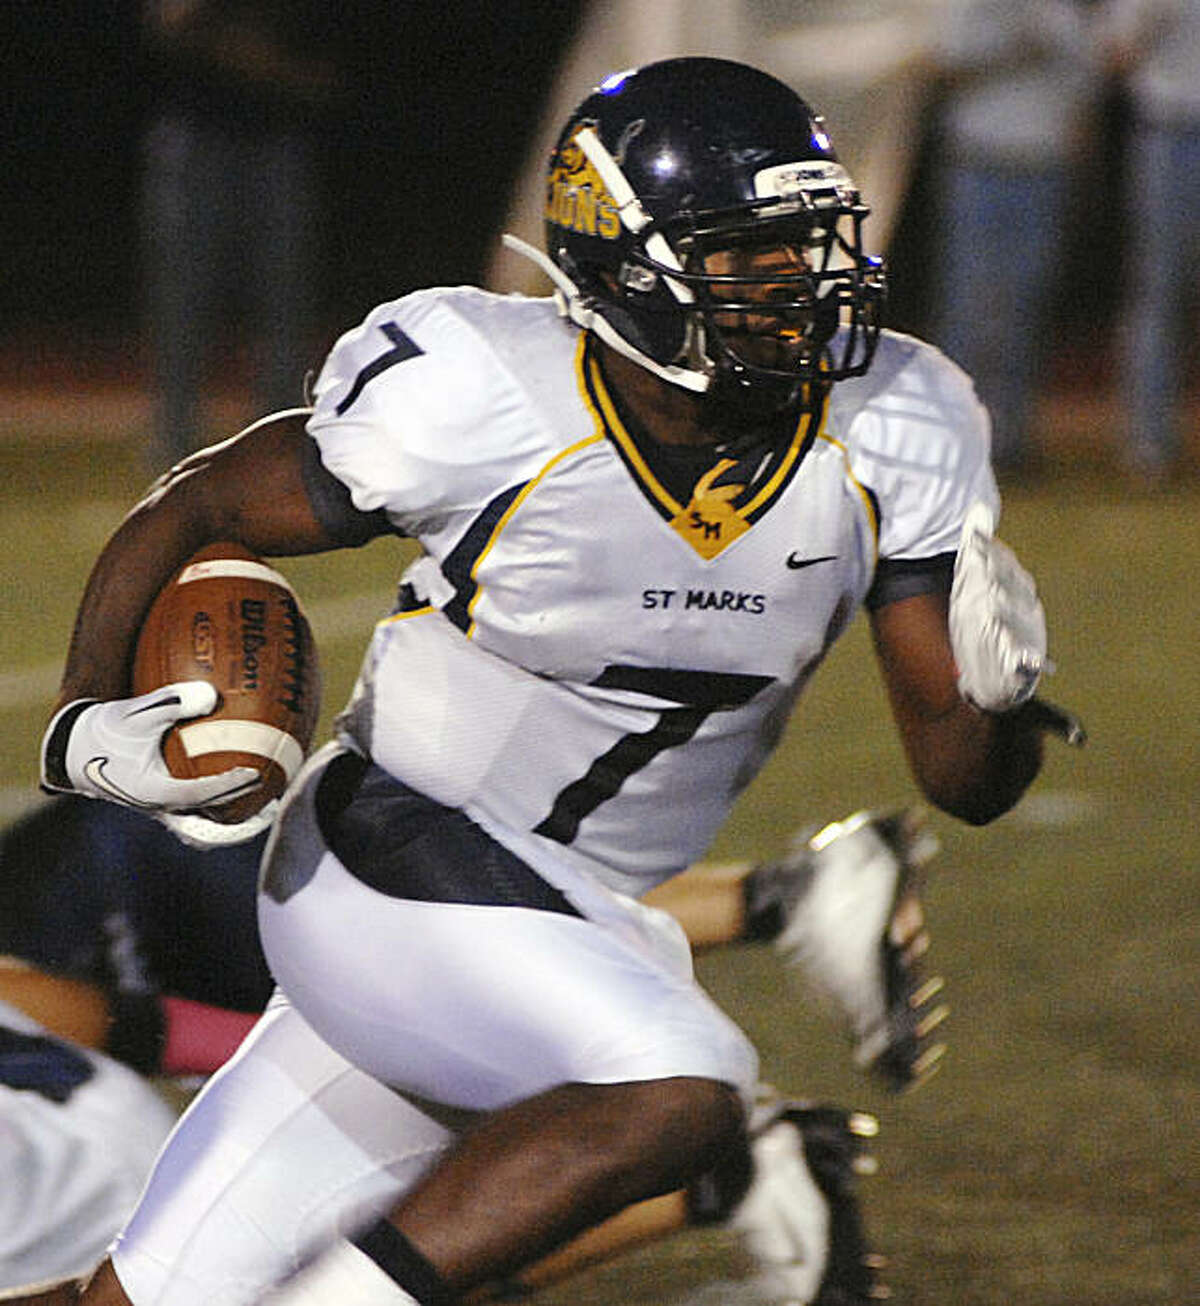 St. Mark's wide receiver, Ty Montgomery (7), carries the ball during early first quarter action Friday October 15, 2010 evening at Episcopal School of Dallas' Gene and Jerry Jones Family Stadium.